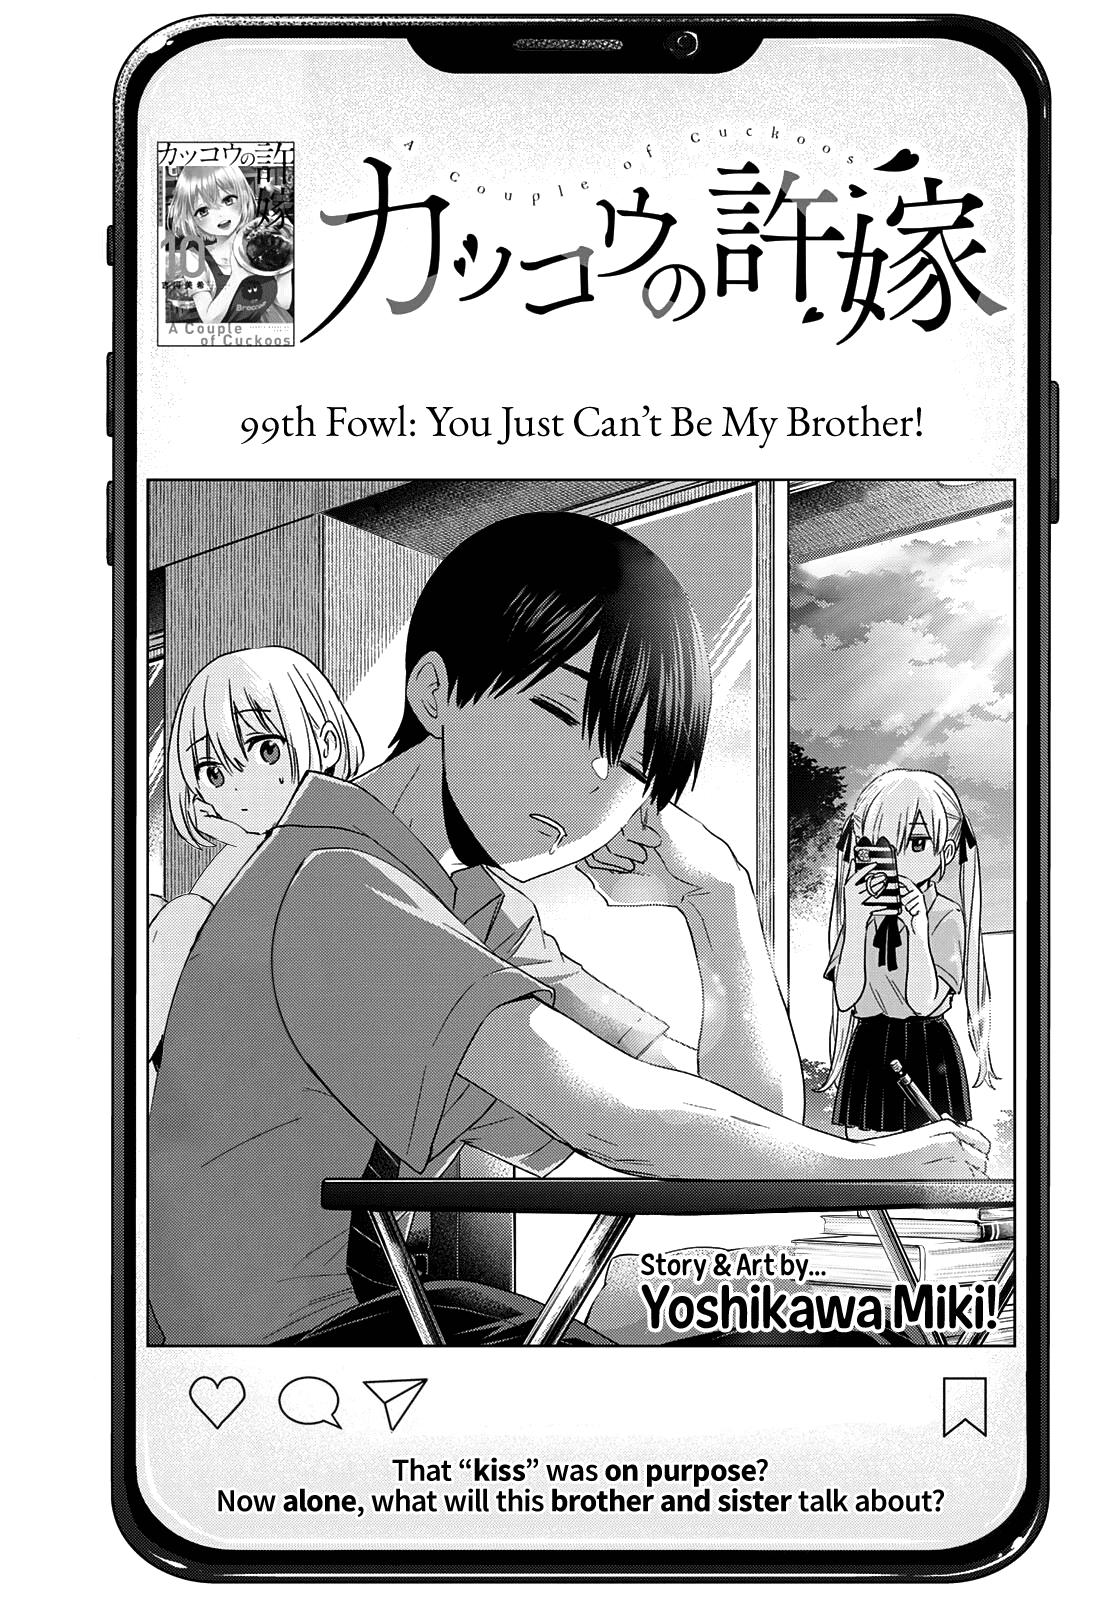 Read Manga A Couple of Cuckoos - Chapter 80